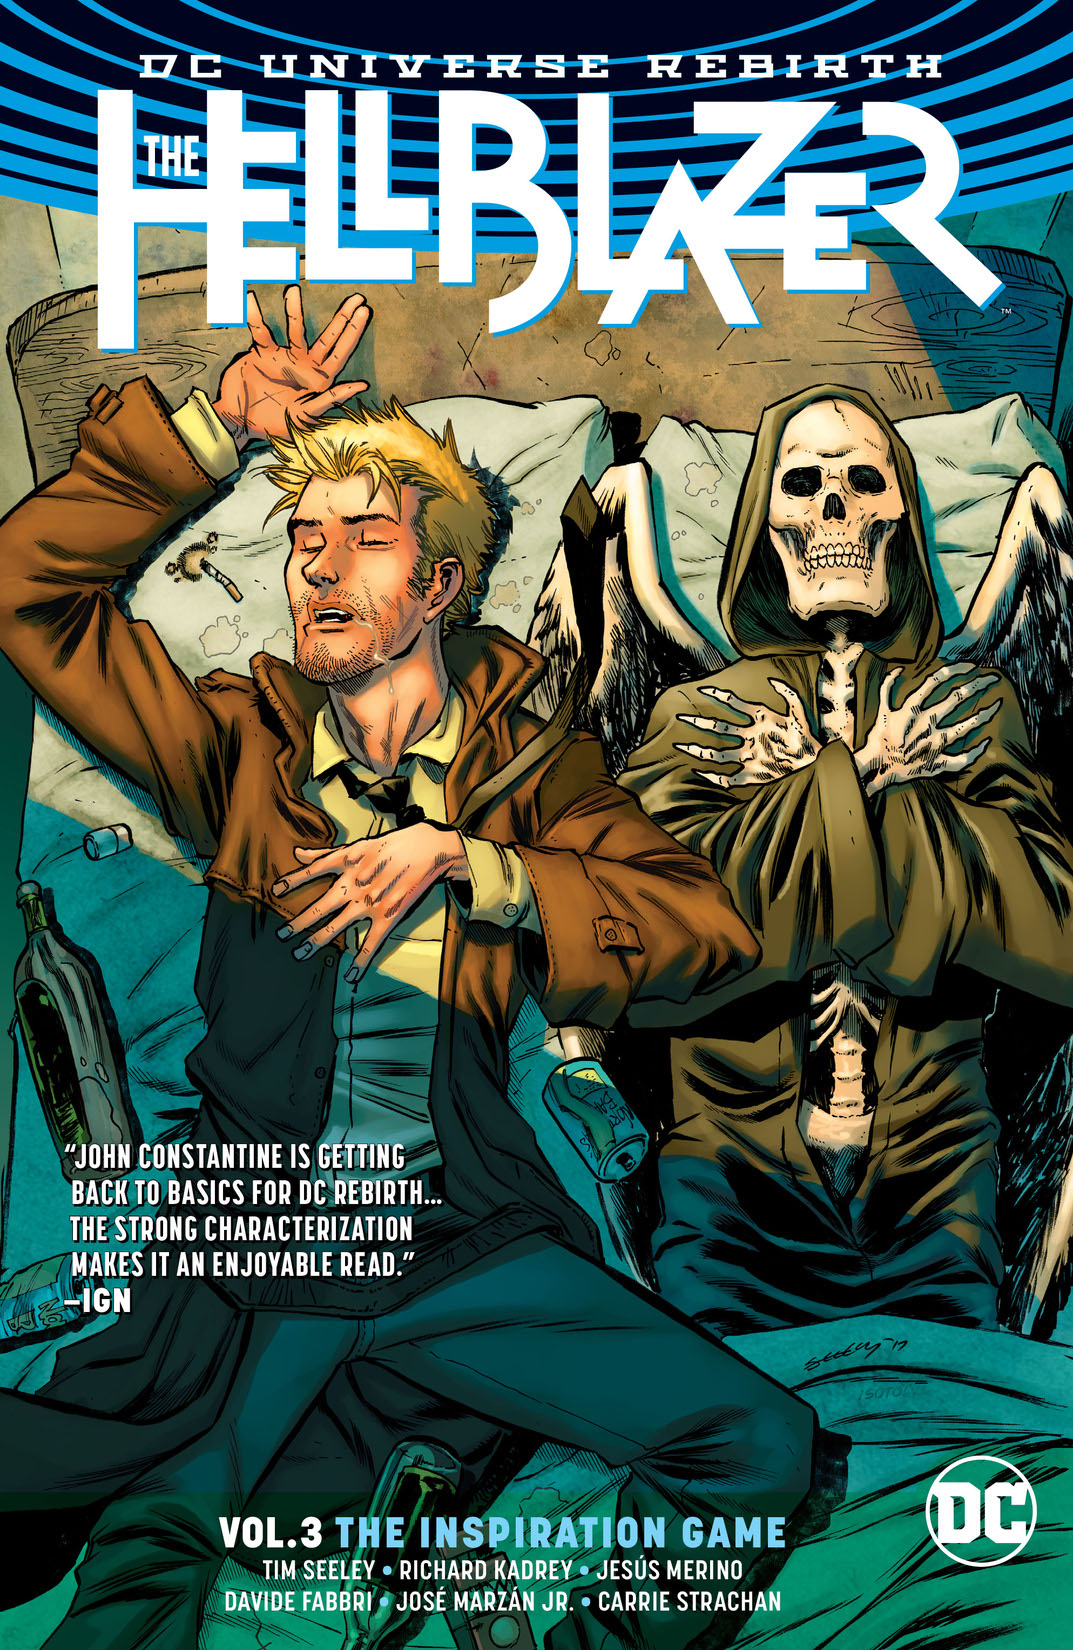 The Hellblazer Vol. 3: The Inspiration Game preview images